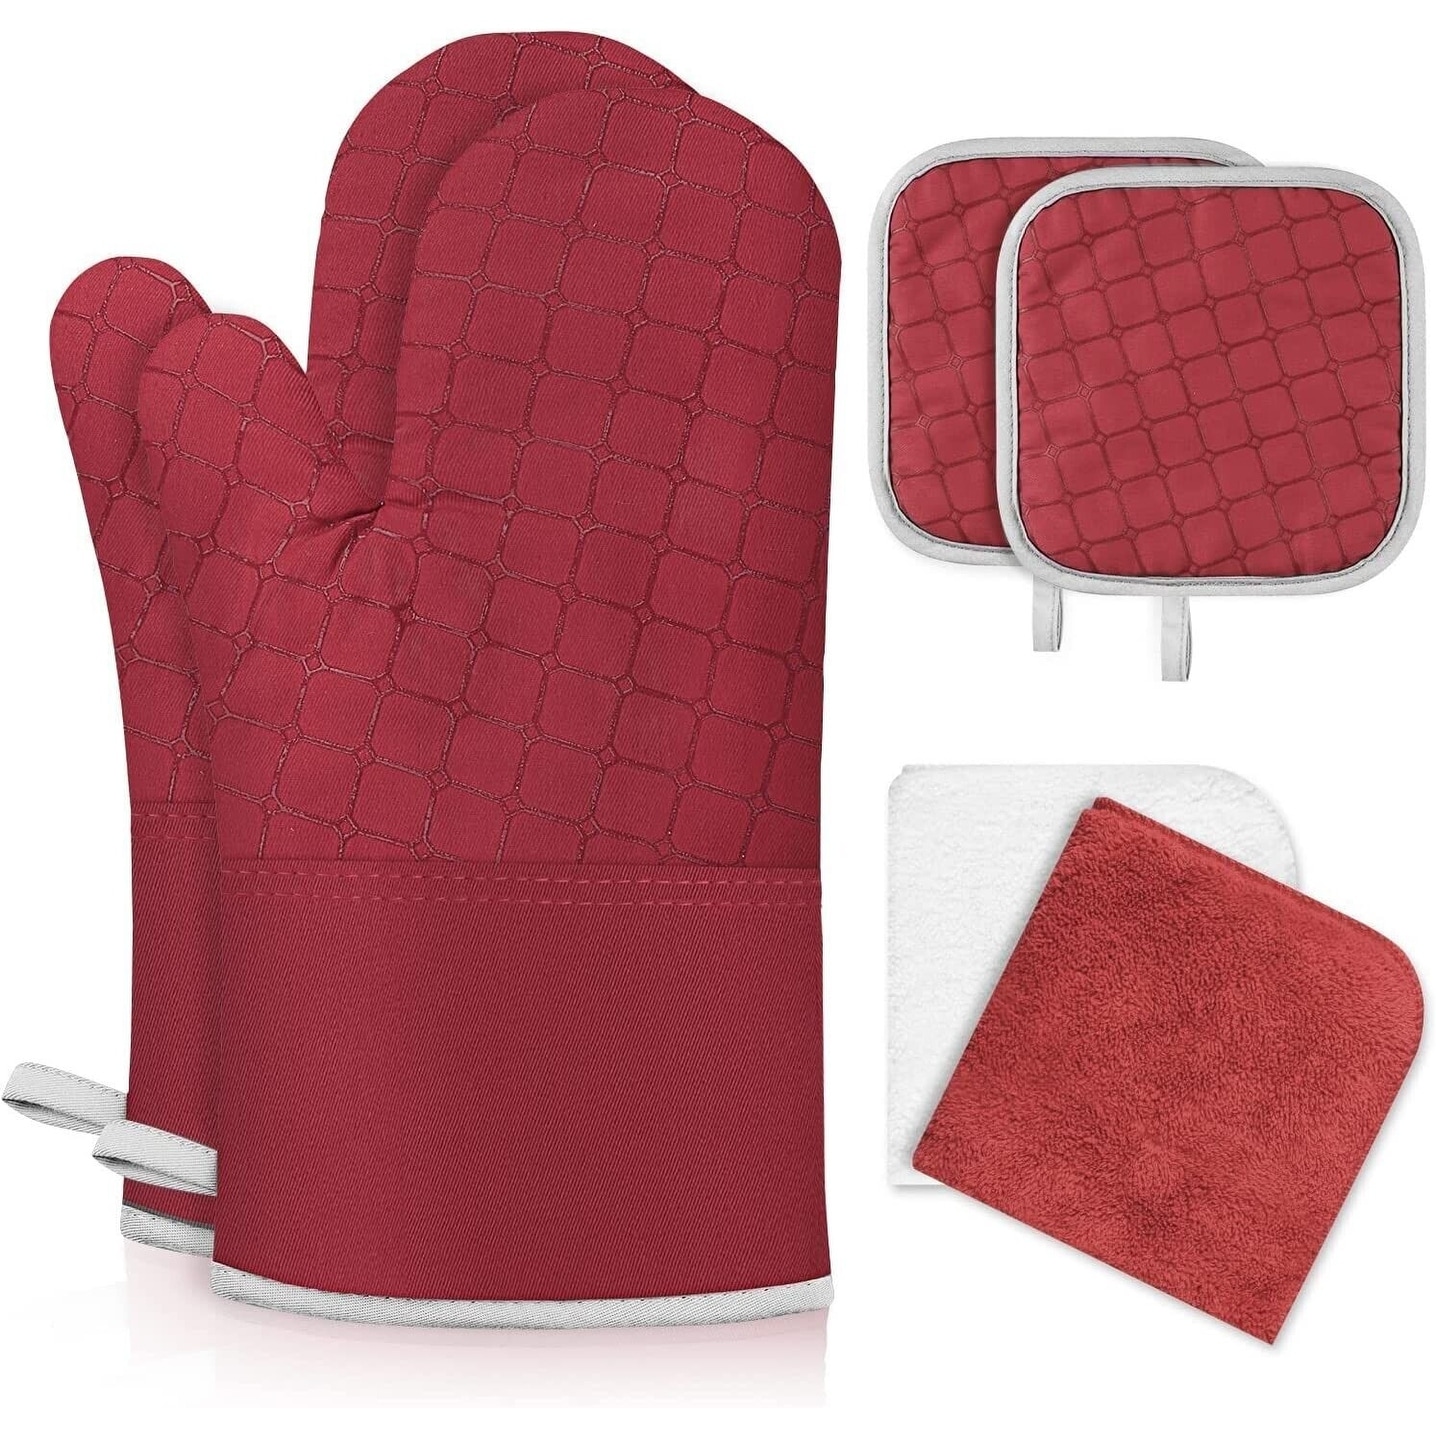 Heavy Duty Red Silicone Oven Mitts and Pot Holders - Light Red